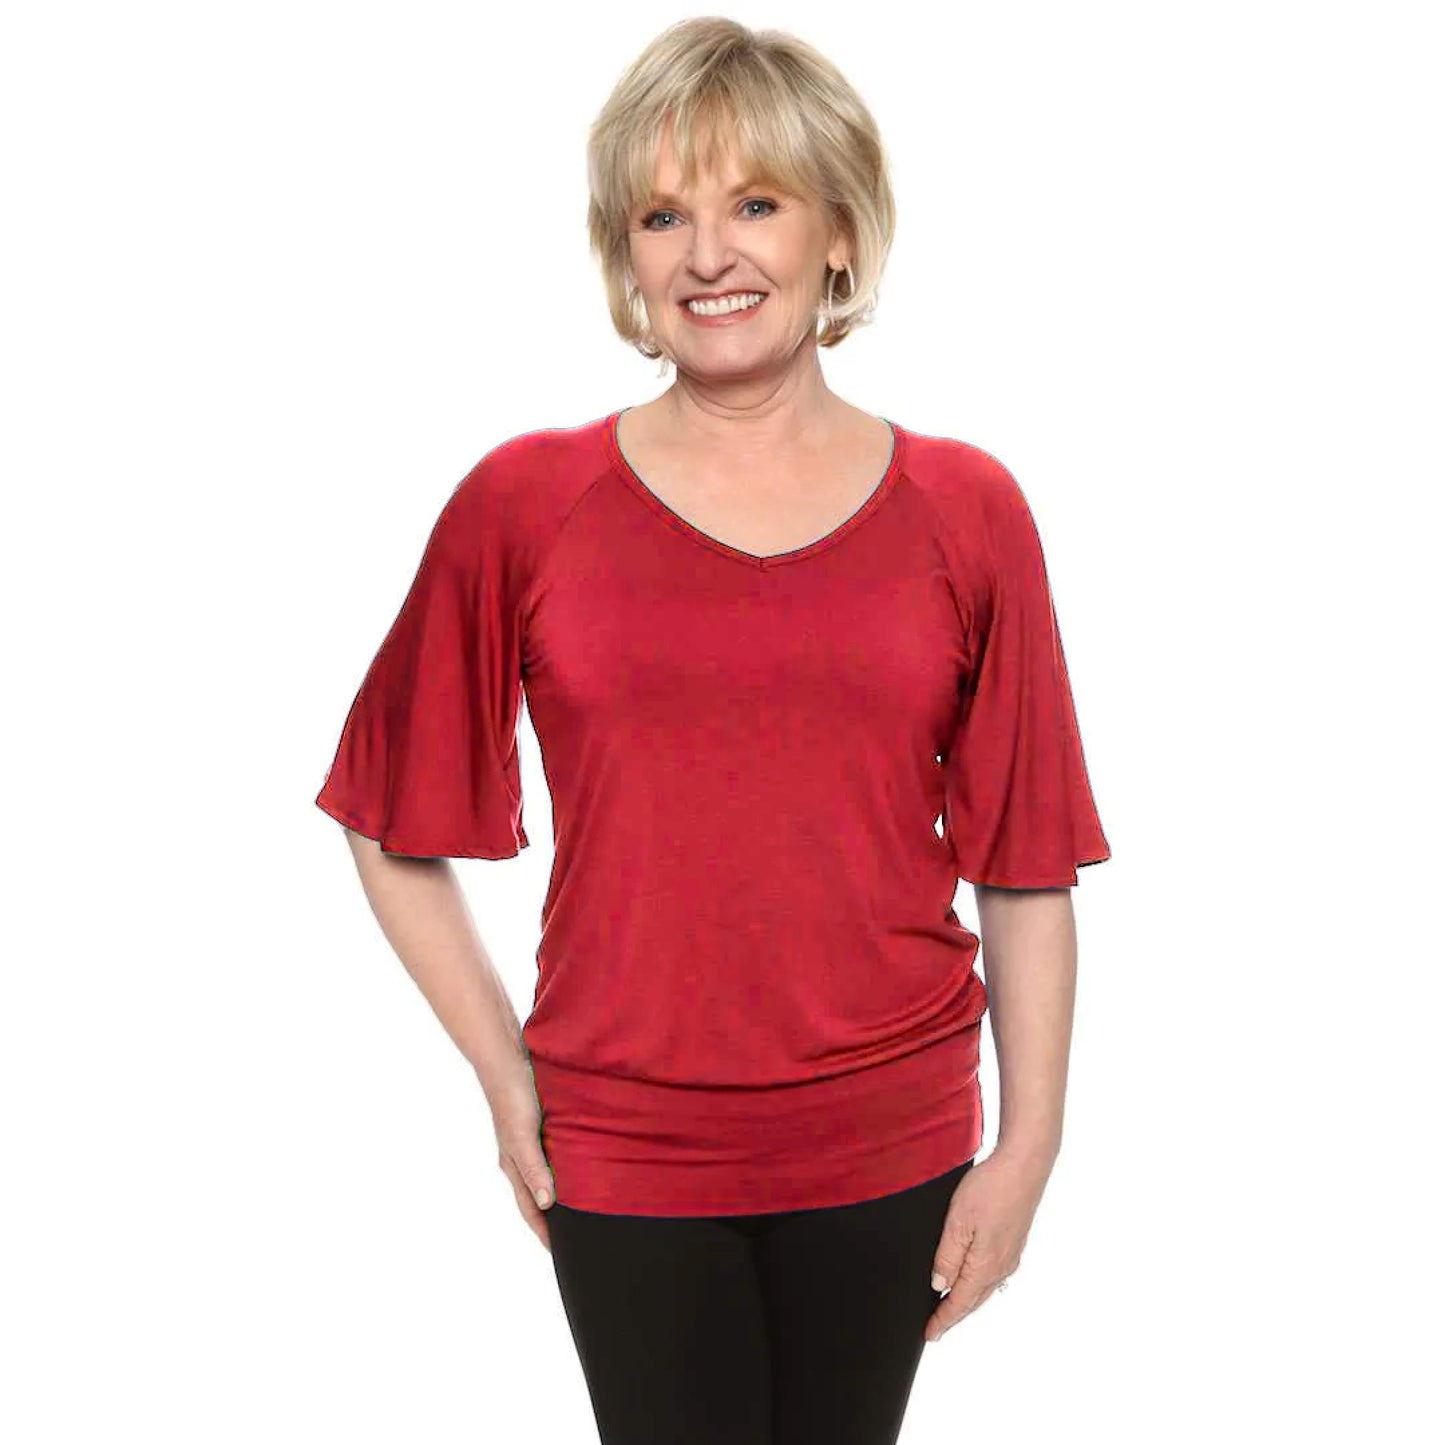 Bell Sleeved V-neck womans top